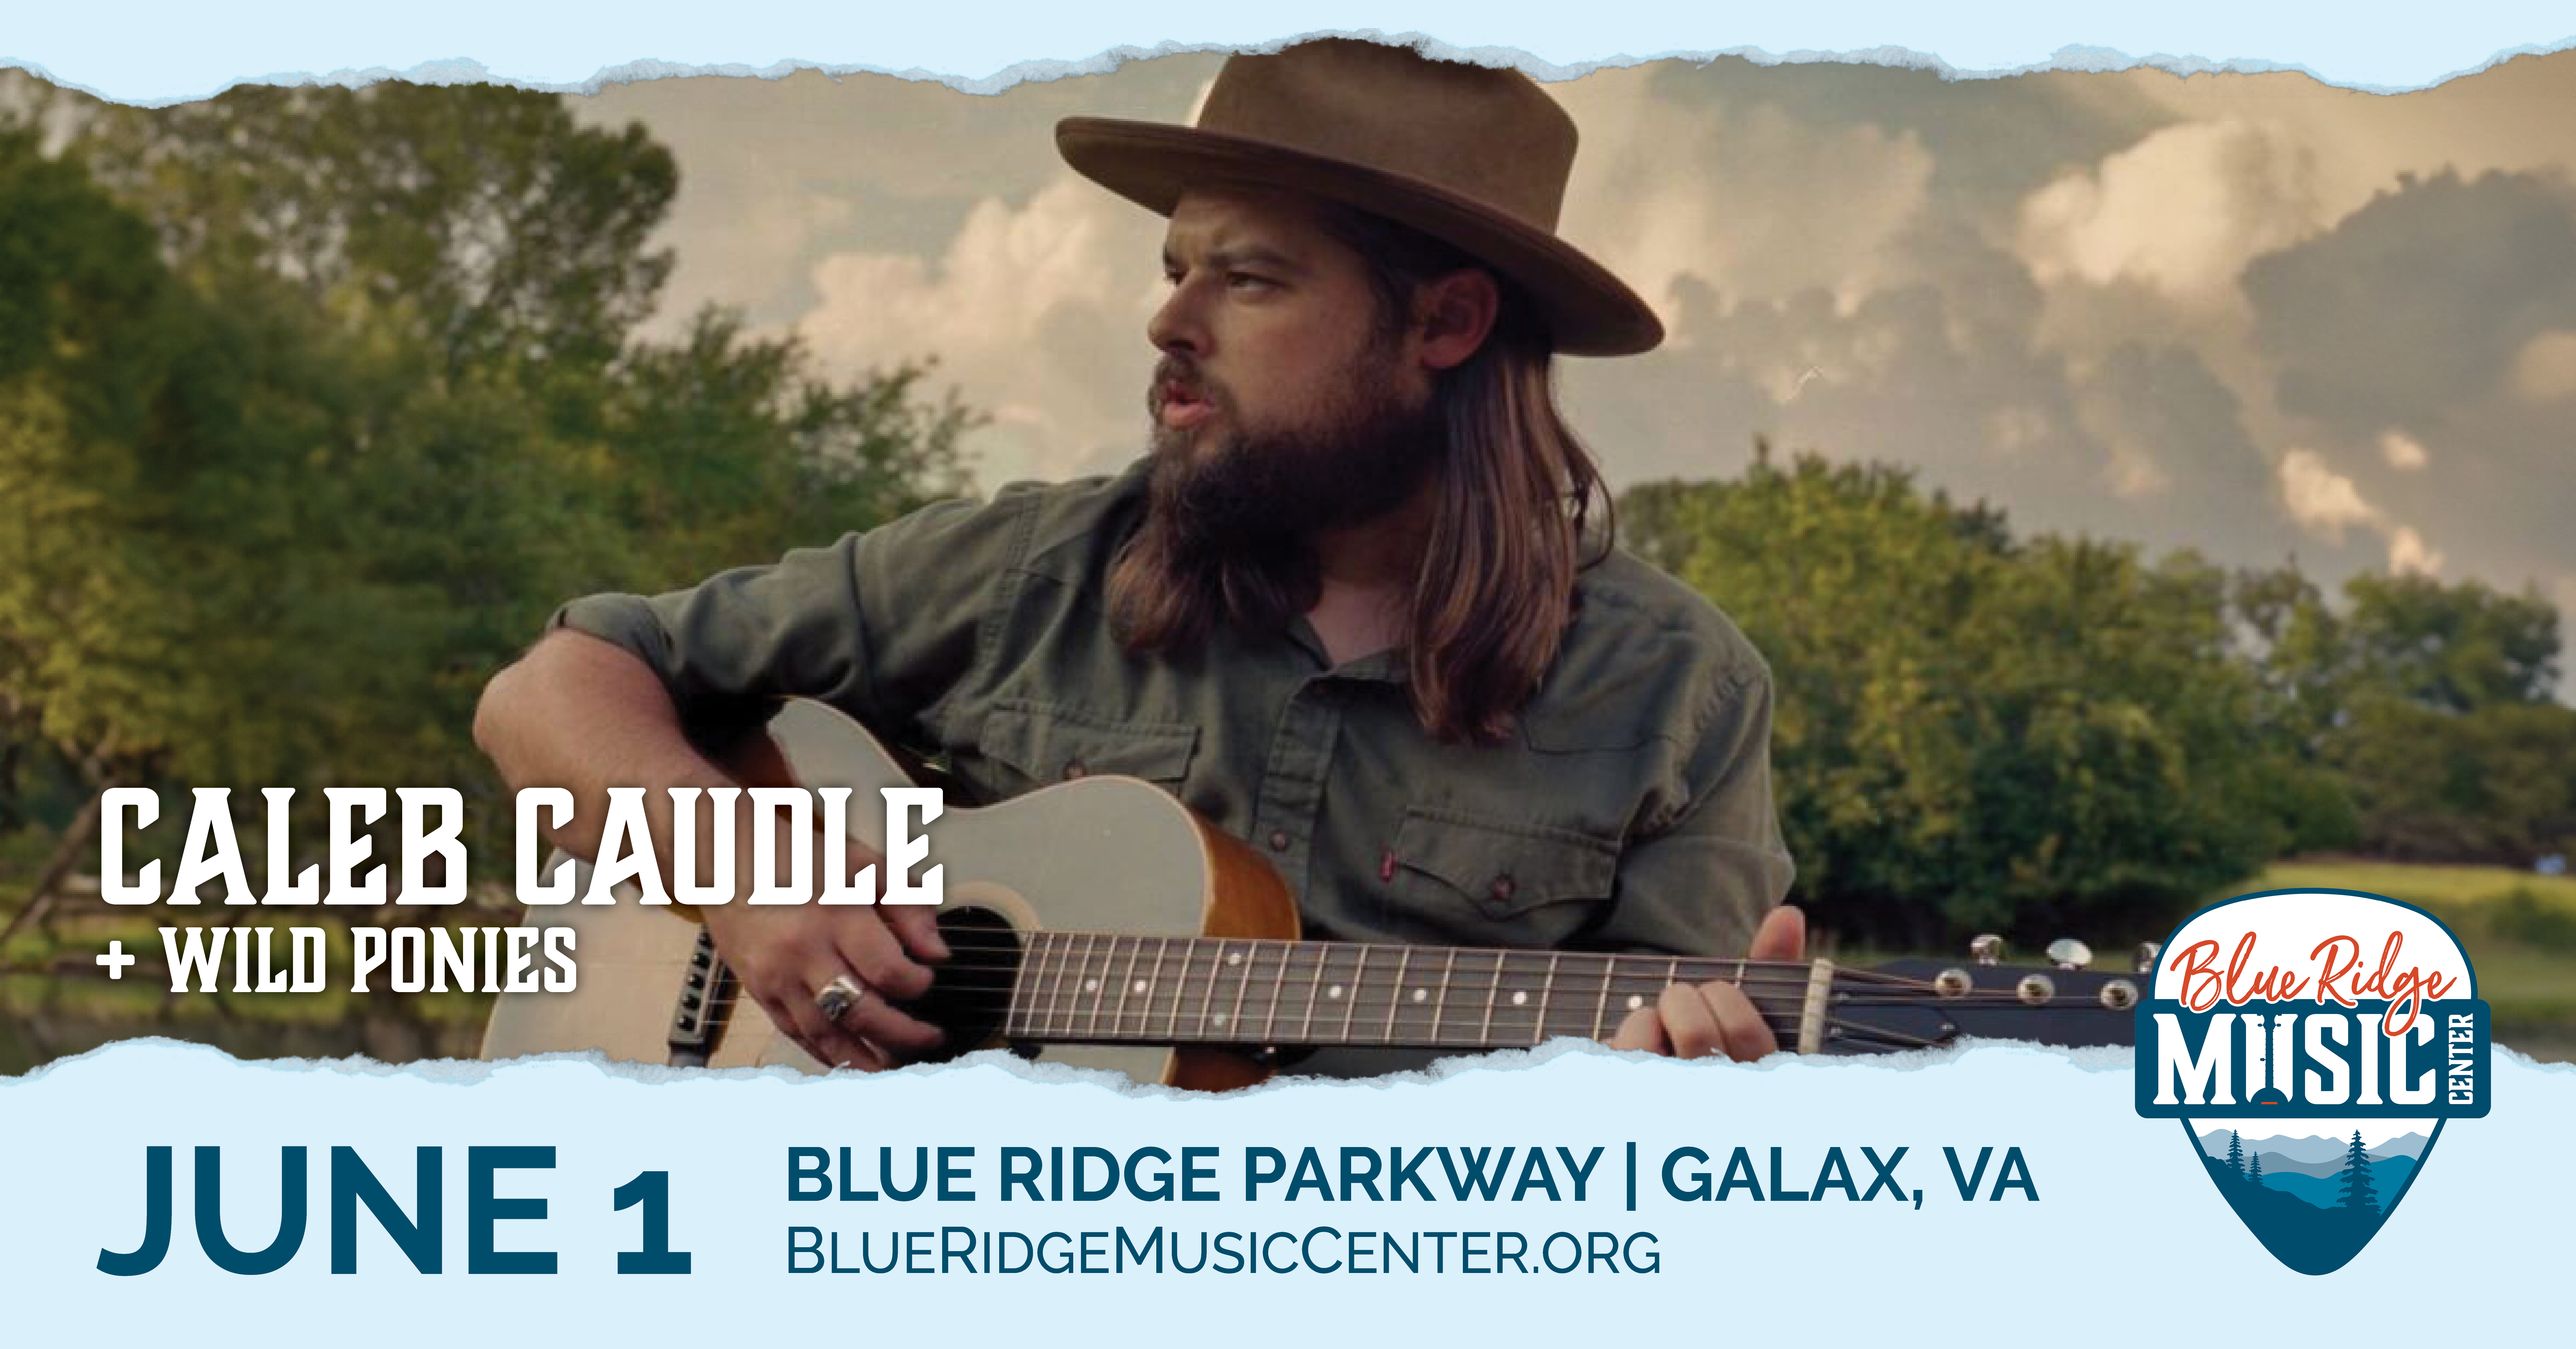 Caleb Caudle performing with Wild Ponies at the Blue Ridge Music Center